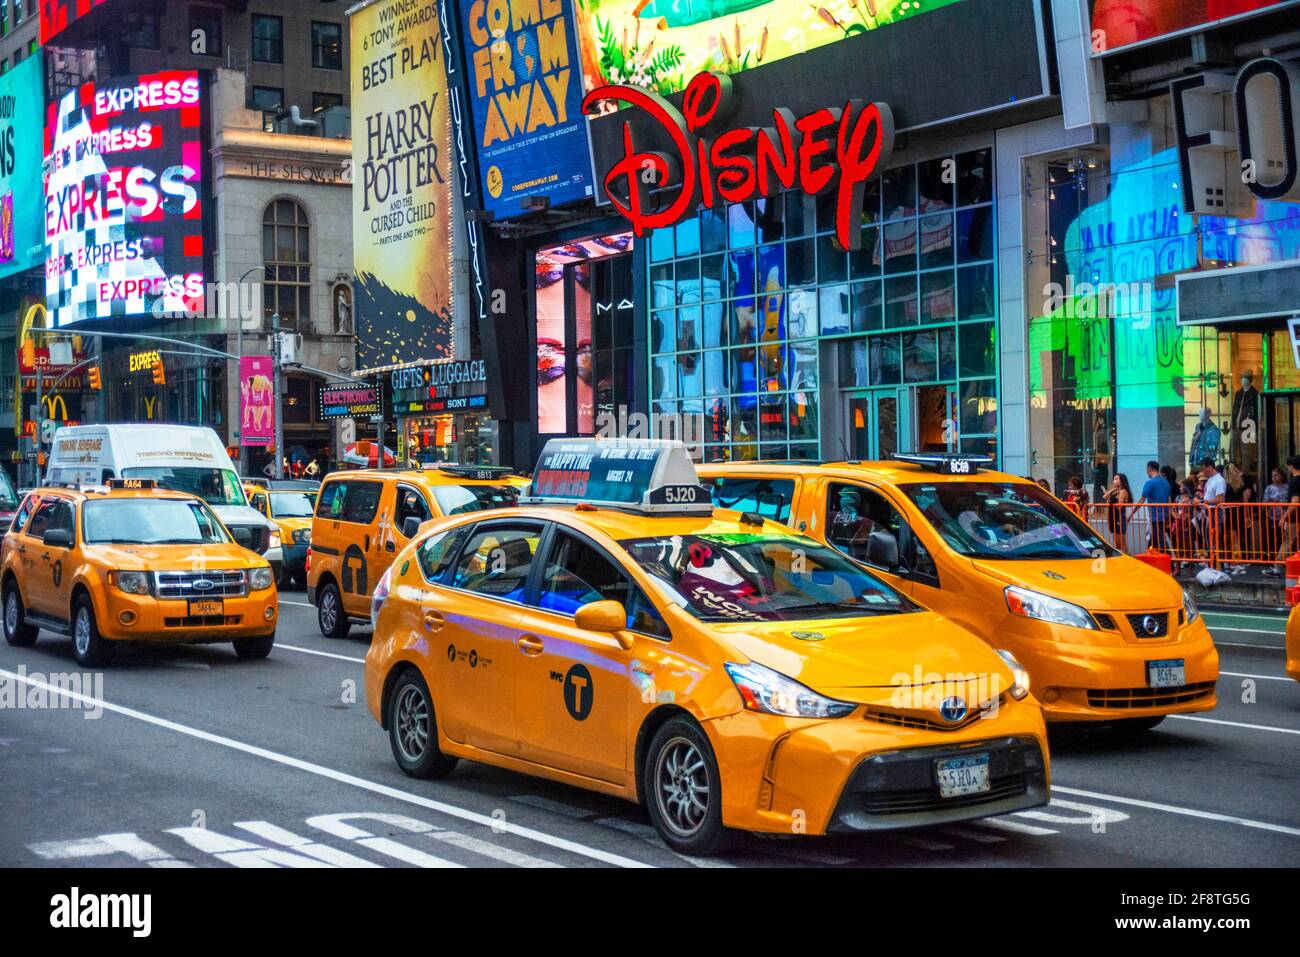 This Disney store is located in Manhattan in Times Square in the heart if the Big Apple. Taxis on busy Broadway in front of the store New York Manhatt Stock Photo